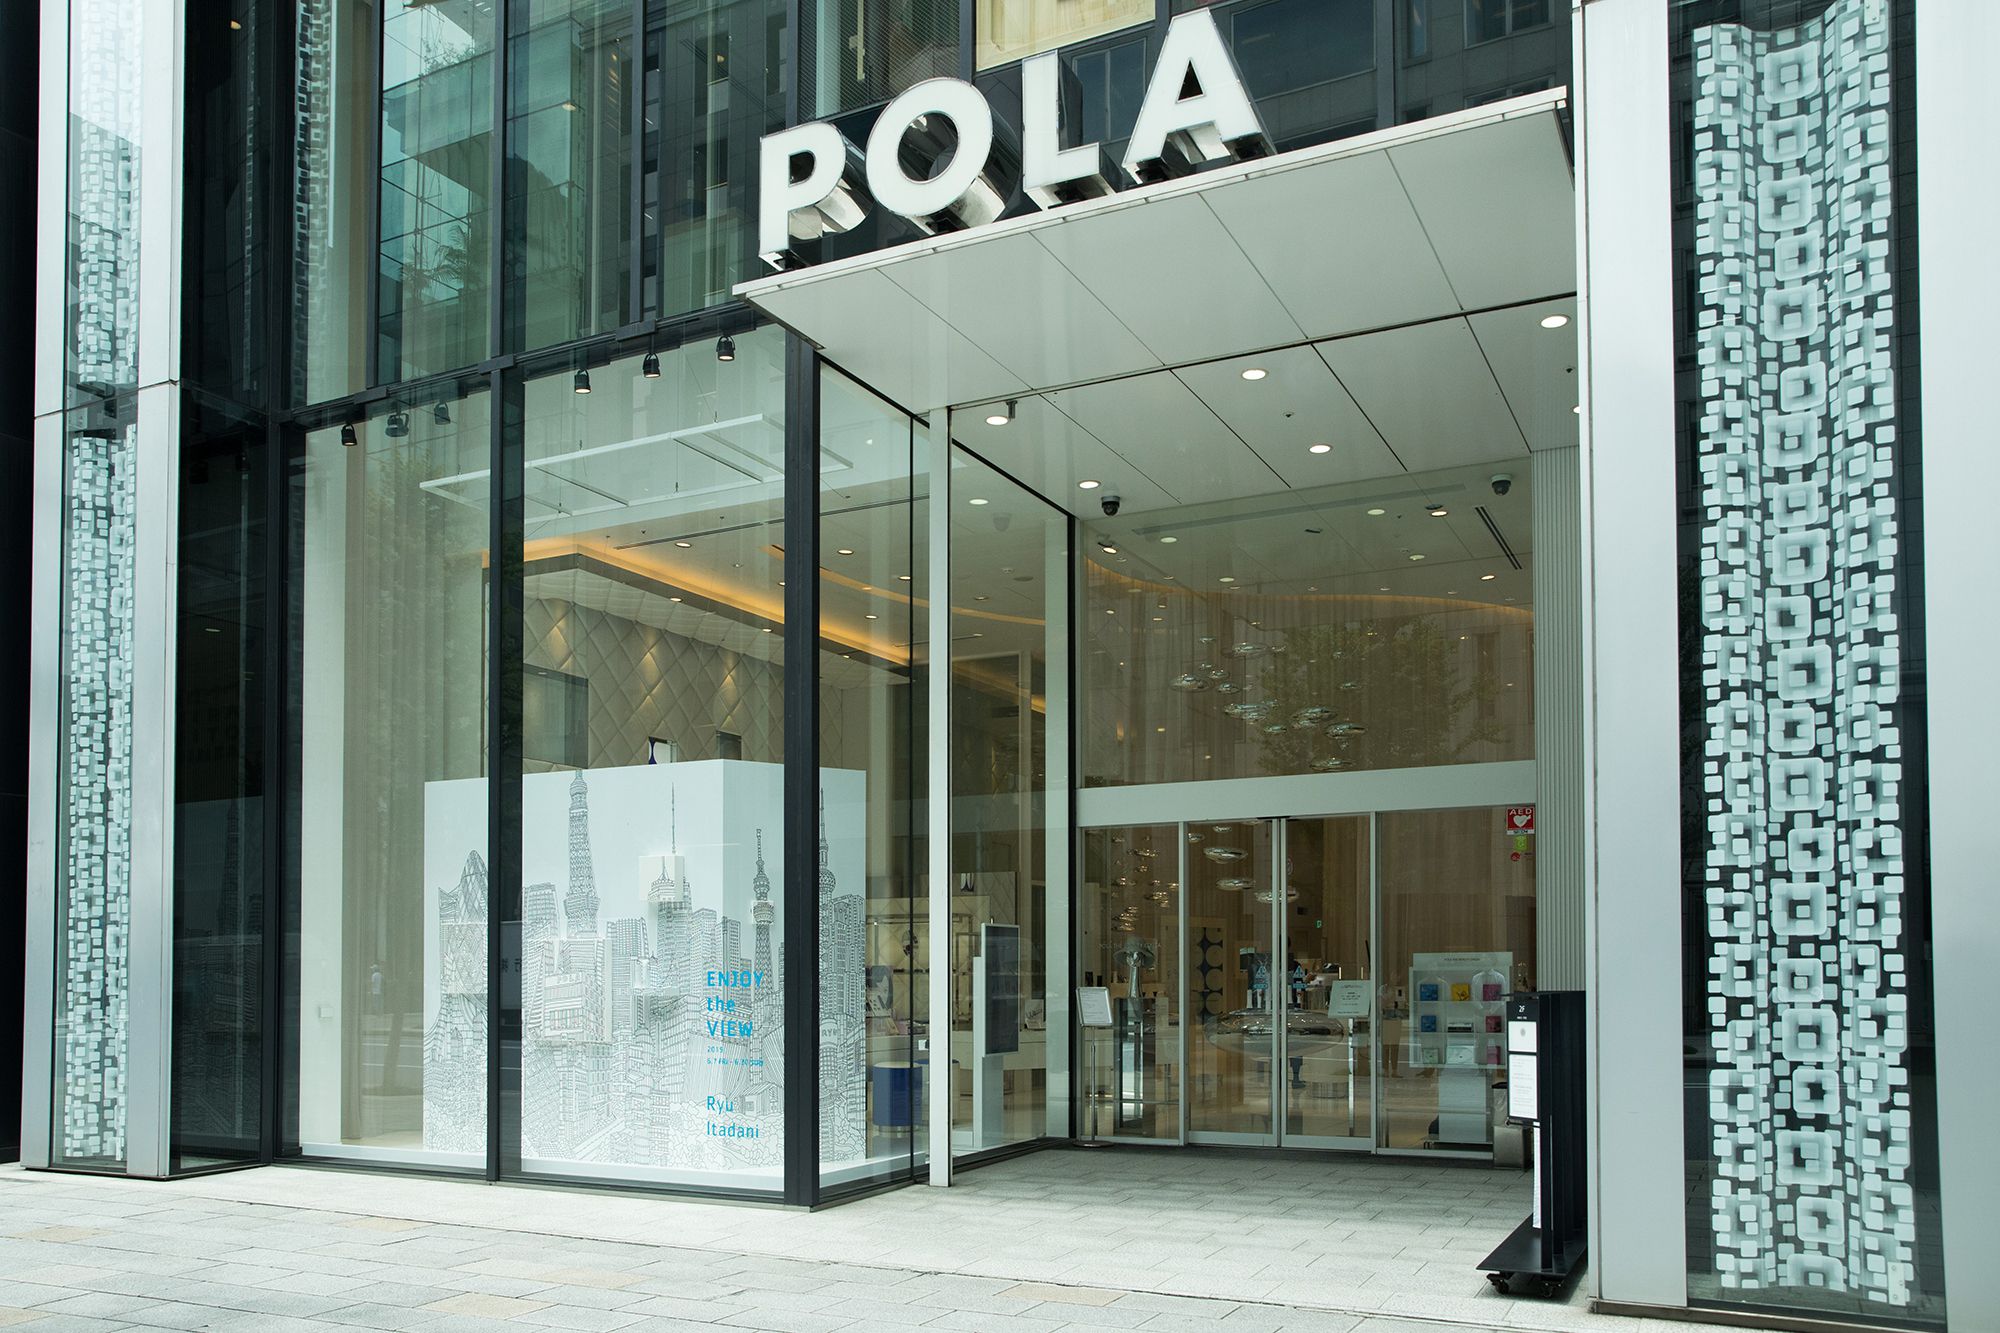 POLA THE BEAUTY GINZA is situated along the Ginza Chuo-Street. The location is easily accessible from the Ginza-Itchome Station.